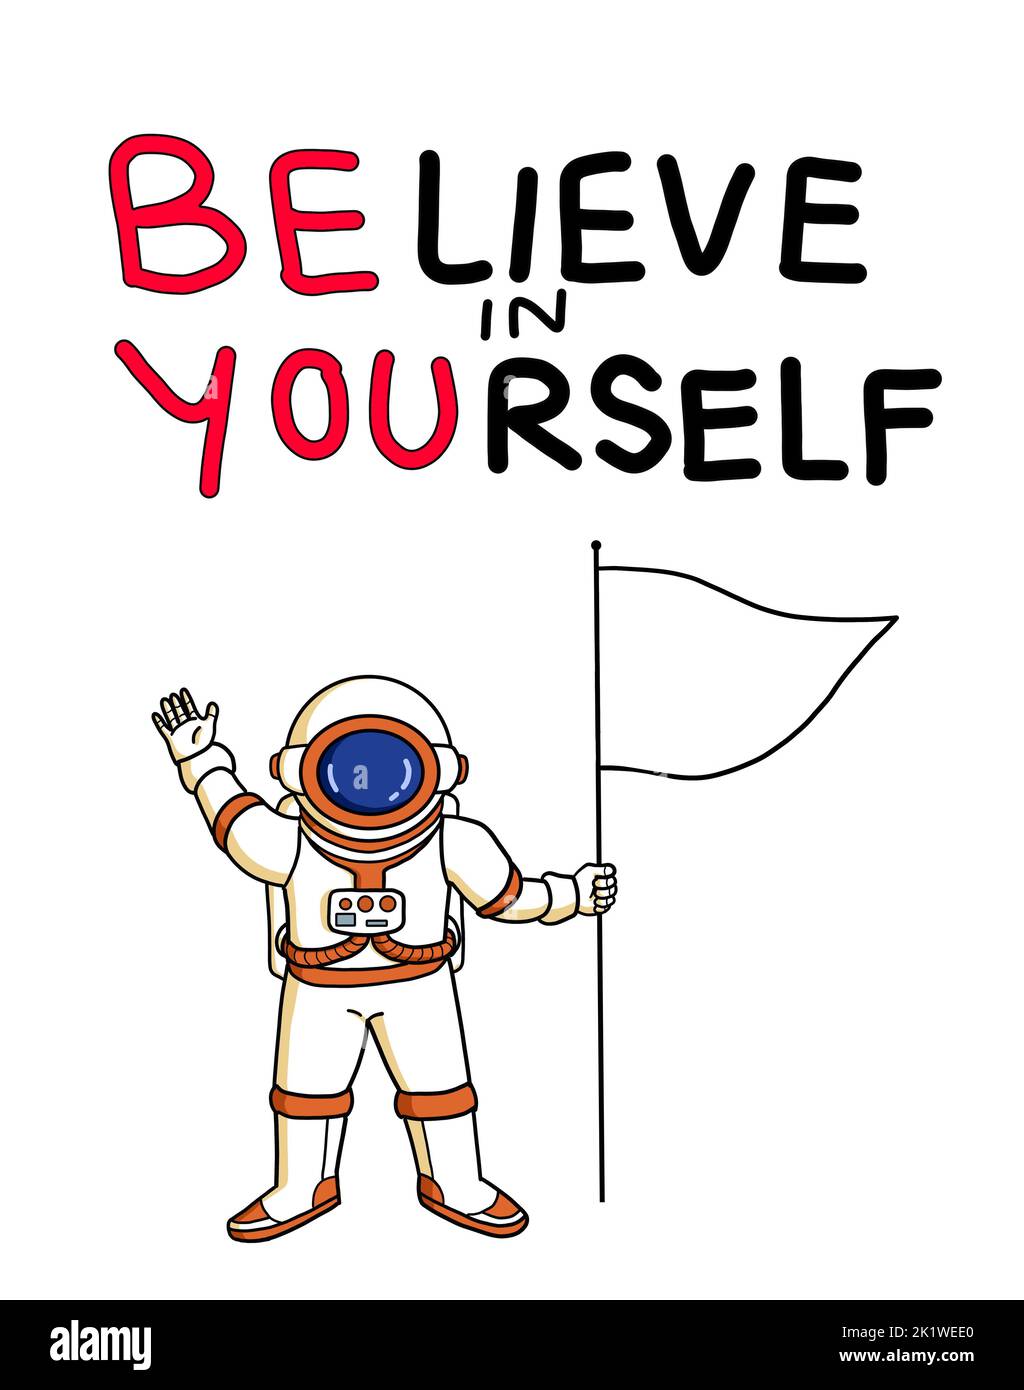 An inspirational handwritten quote 'believe in yourself' and 'be you'. An astronaut holding a flag. Self confidence, improvement, encouragement. Stock Photo